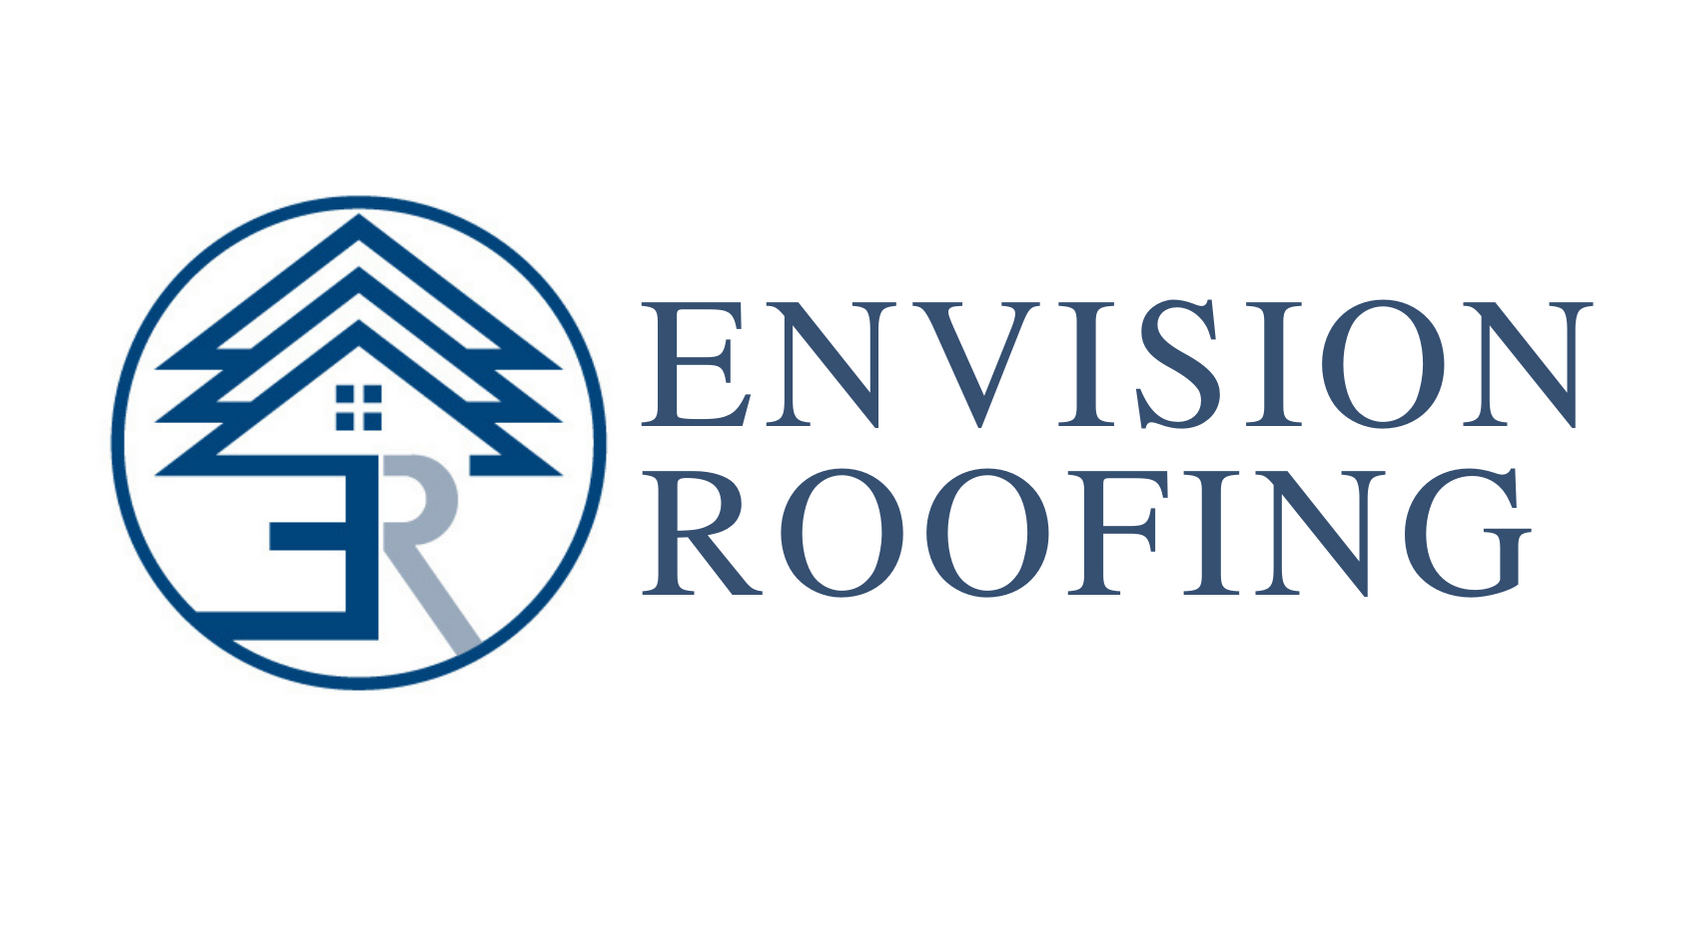 Envision Roofing logo